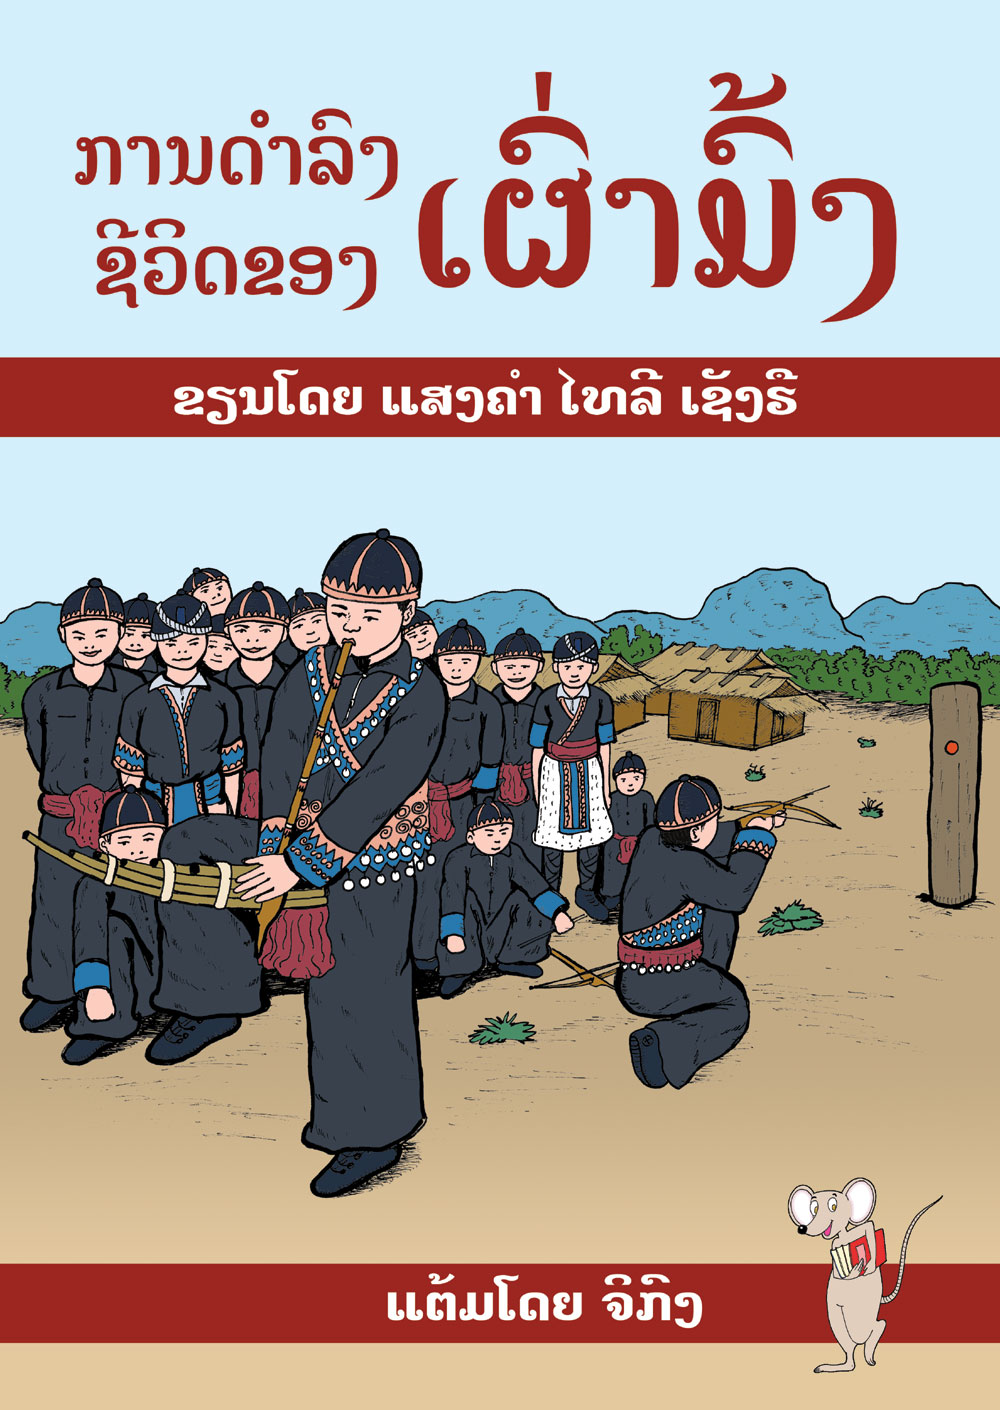 Hmong Life large book cover, published in Lao language